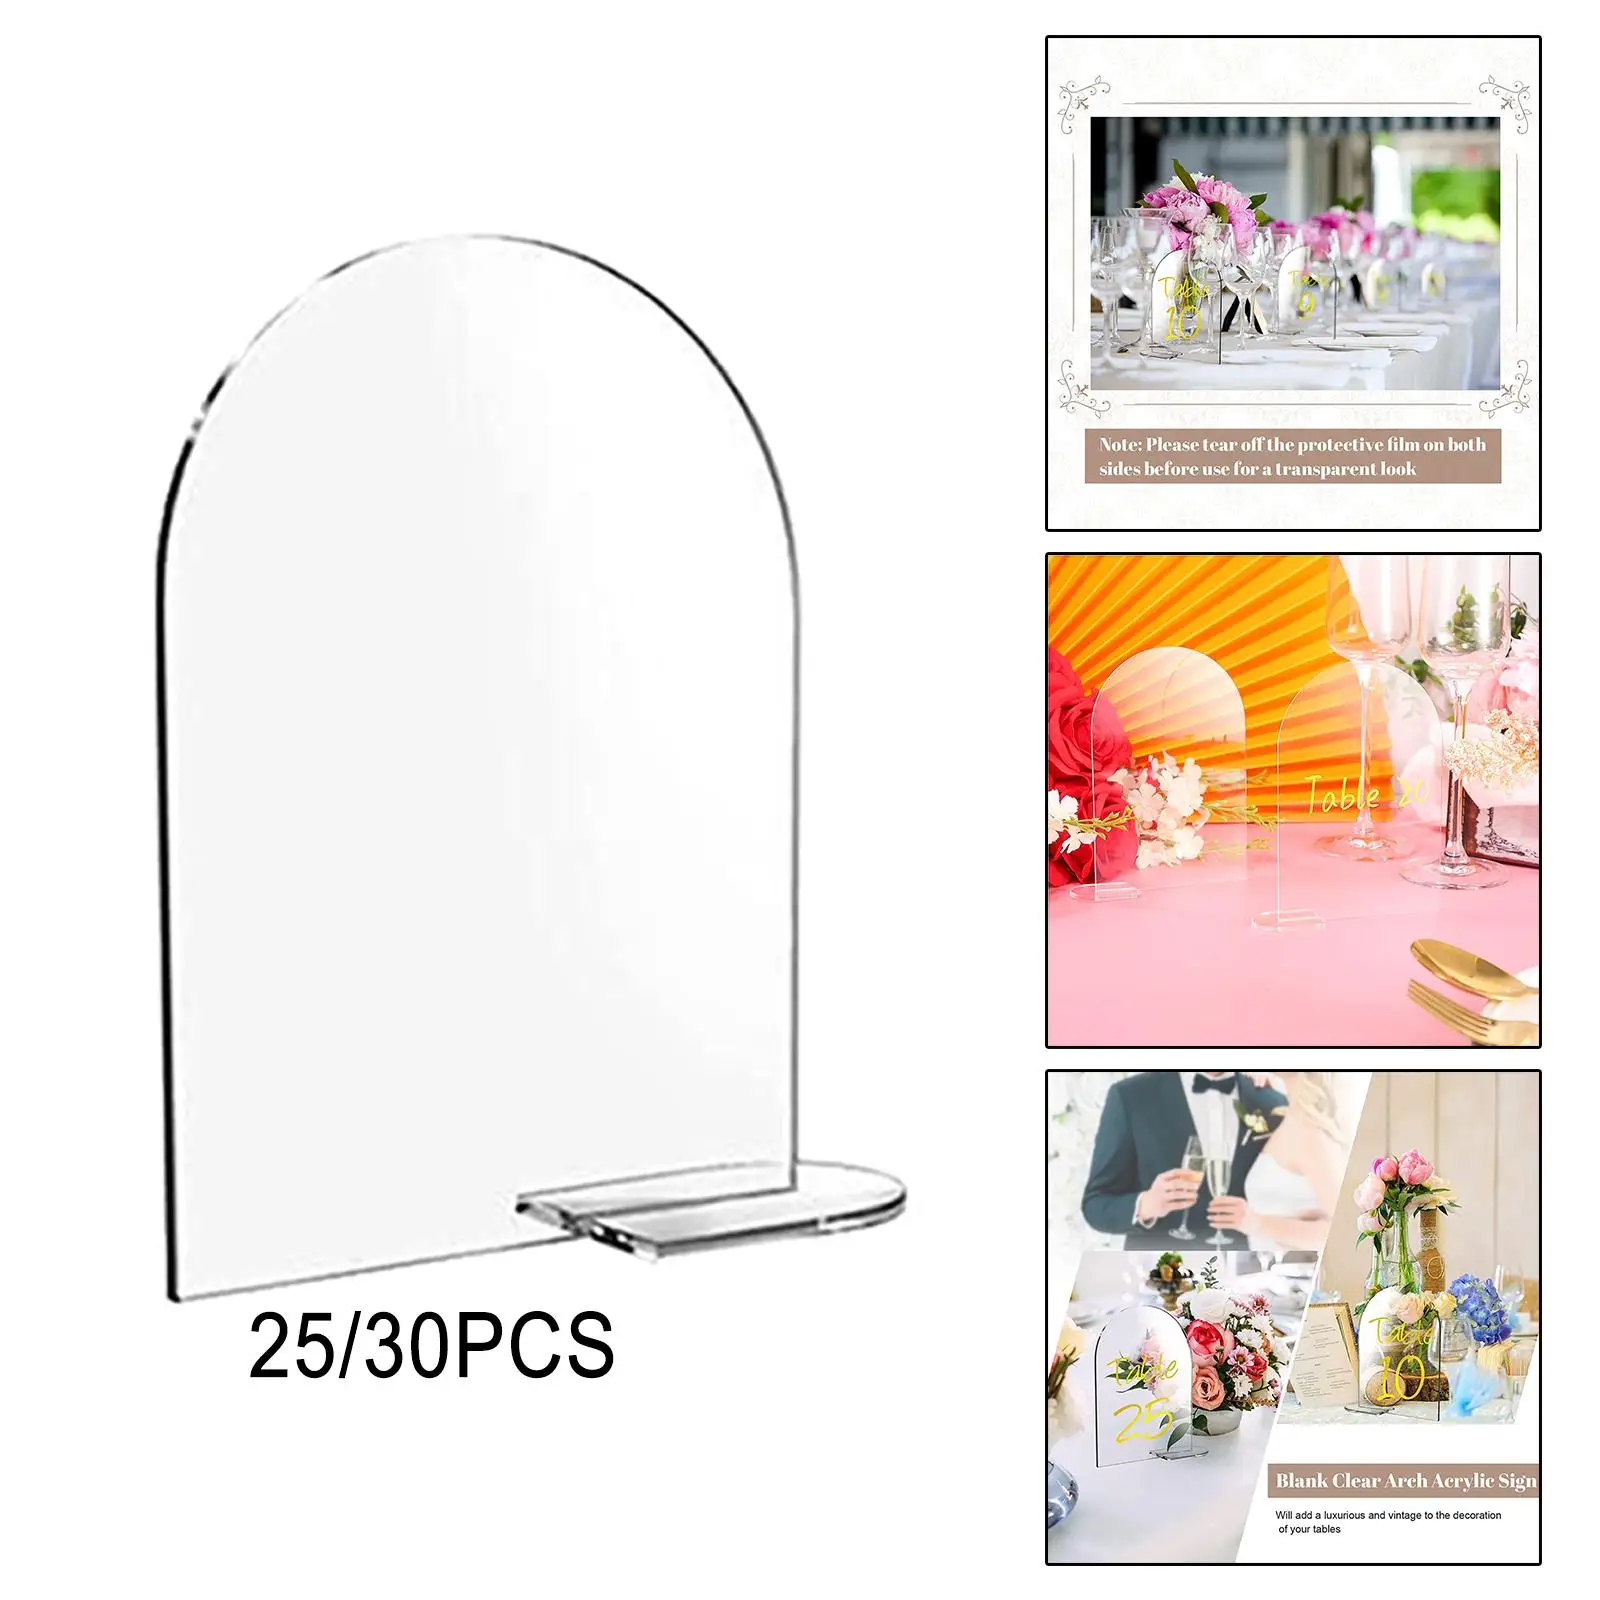 Blank Acrylic Signs Holder with Stand Double Sided Display Arched Round Top Acrylic Signs for Wedding Reception Buffet Office